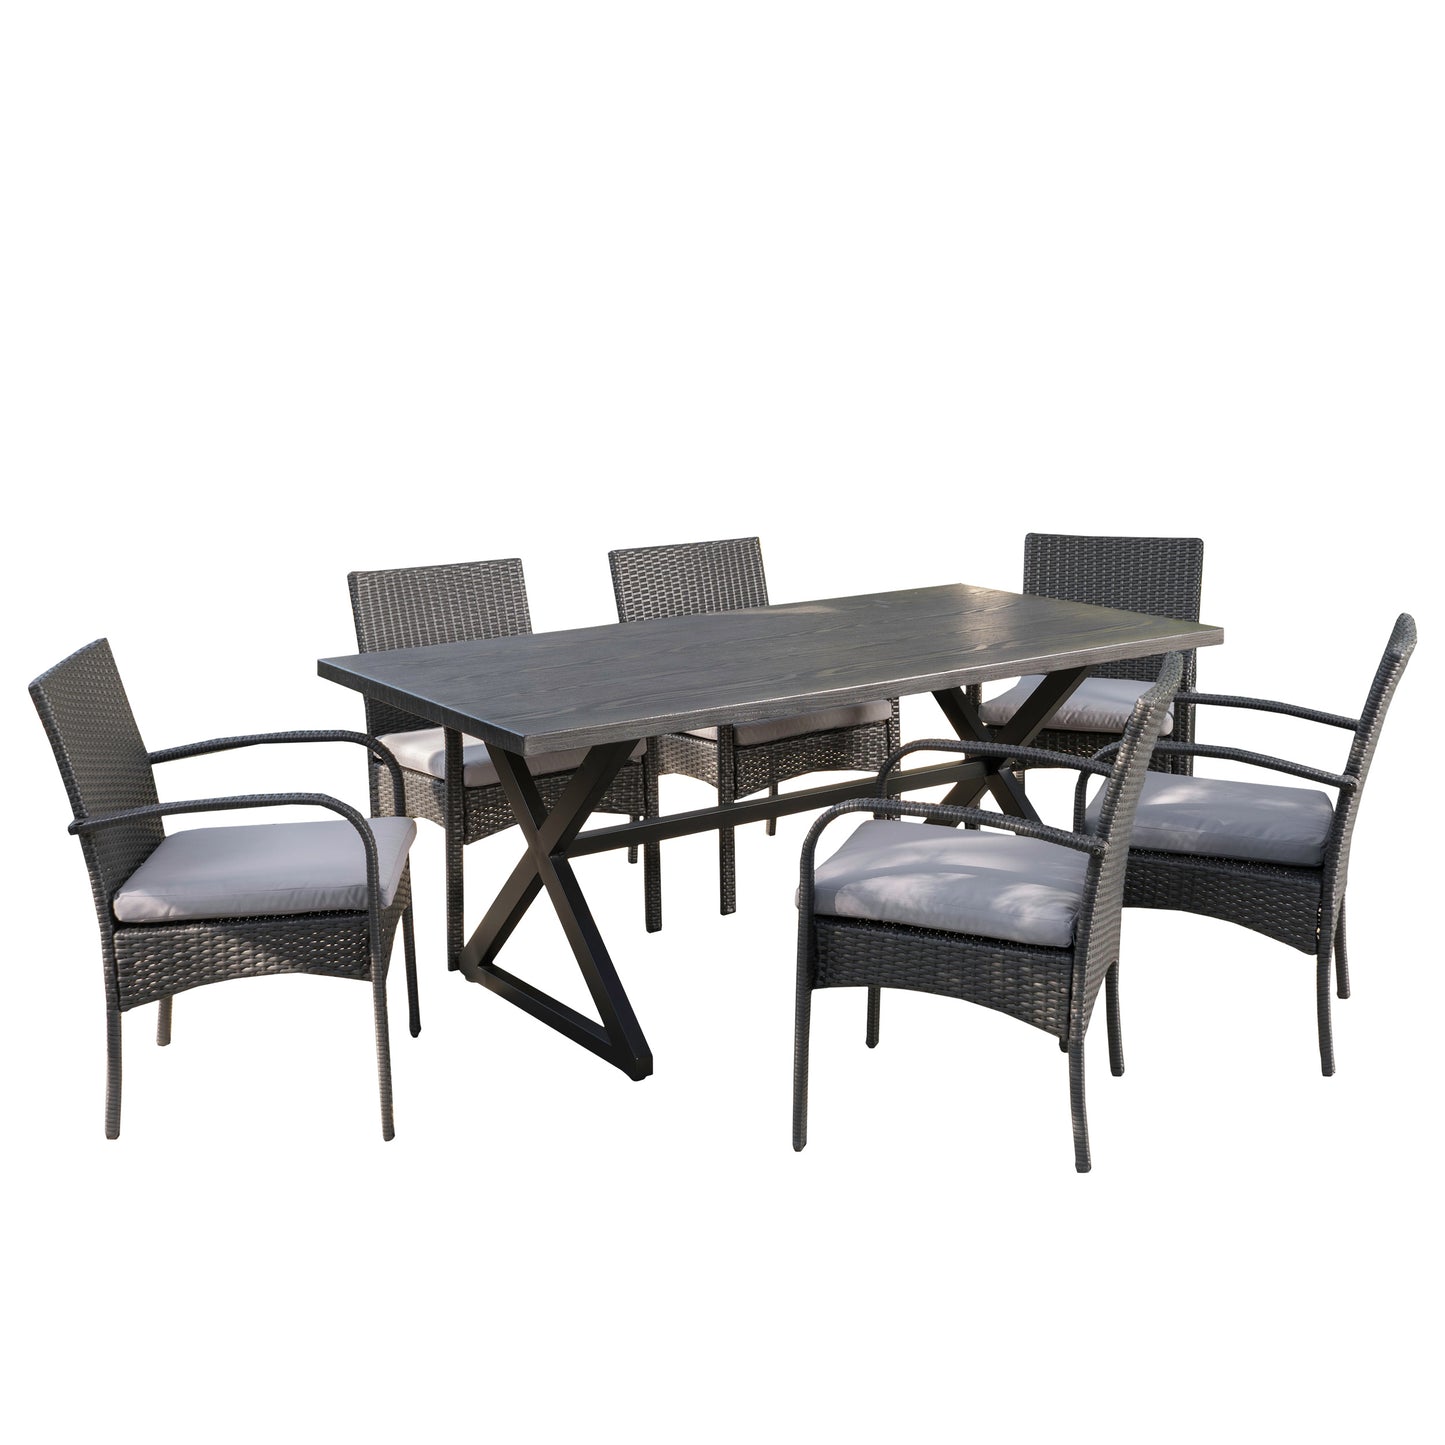 Ashley Outdoor 7 Piece Aluminum Dining Set with Wicker Dining Chairs